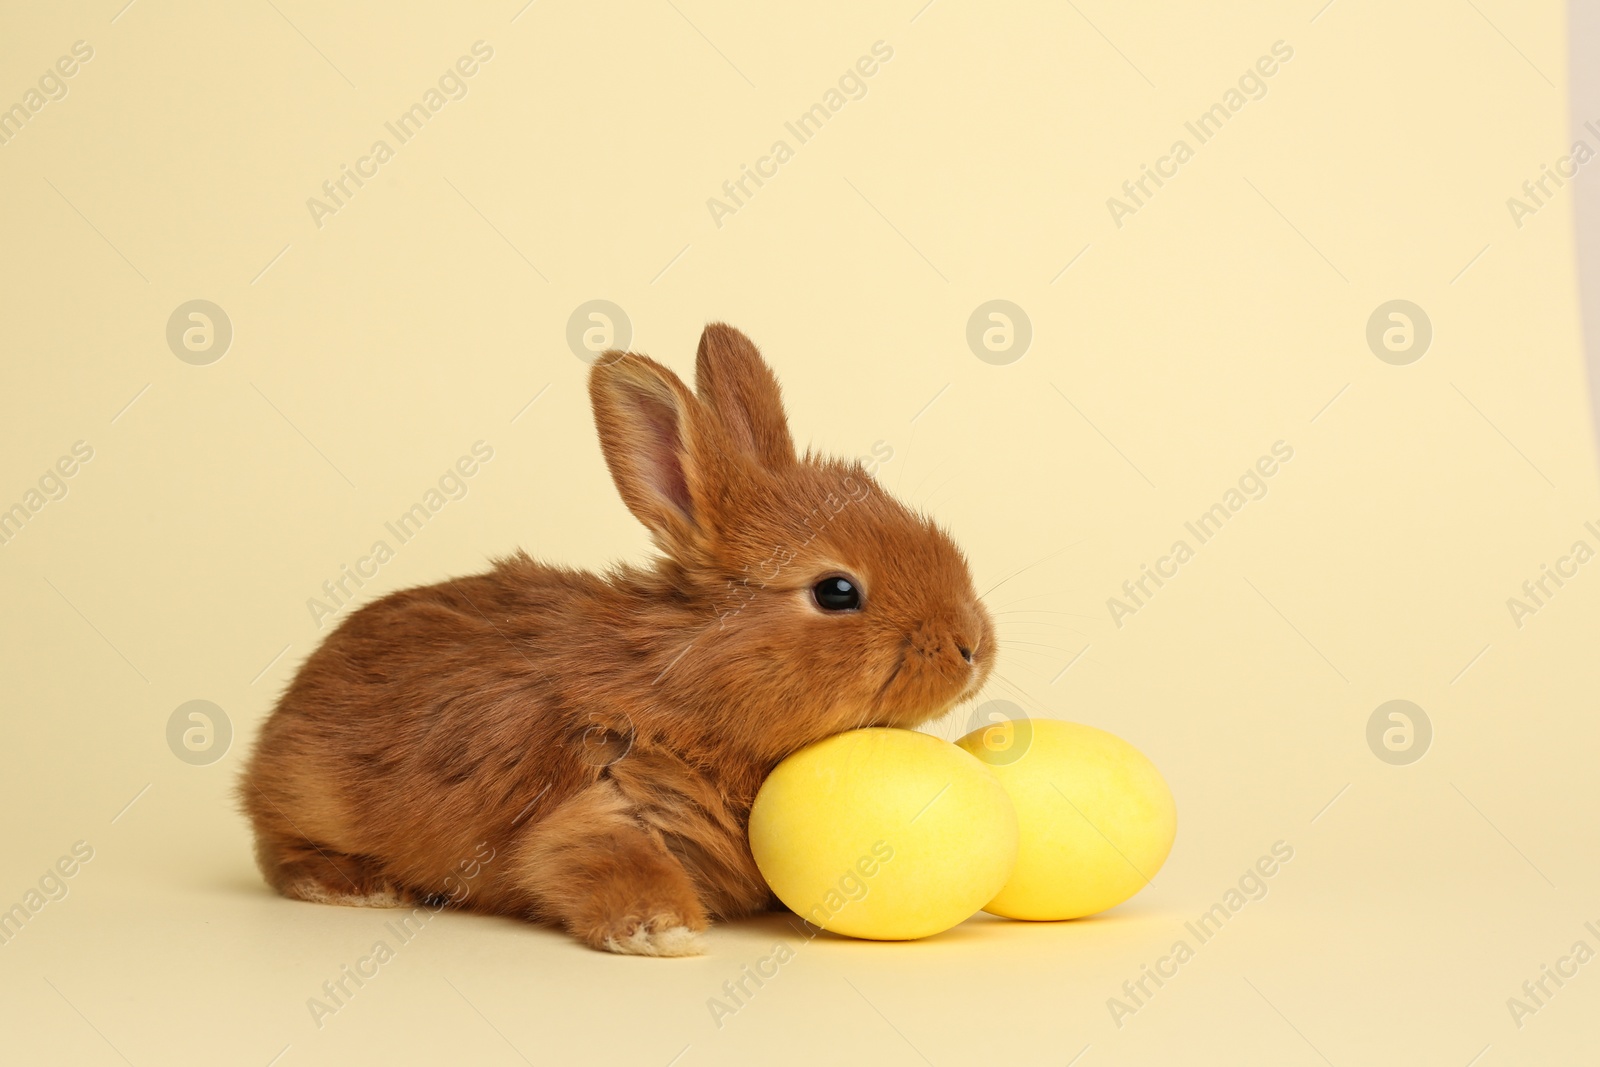 Photo of Adorable fluffy bunny near Easter eggs on yellow background